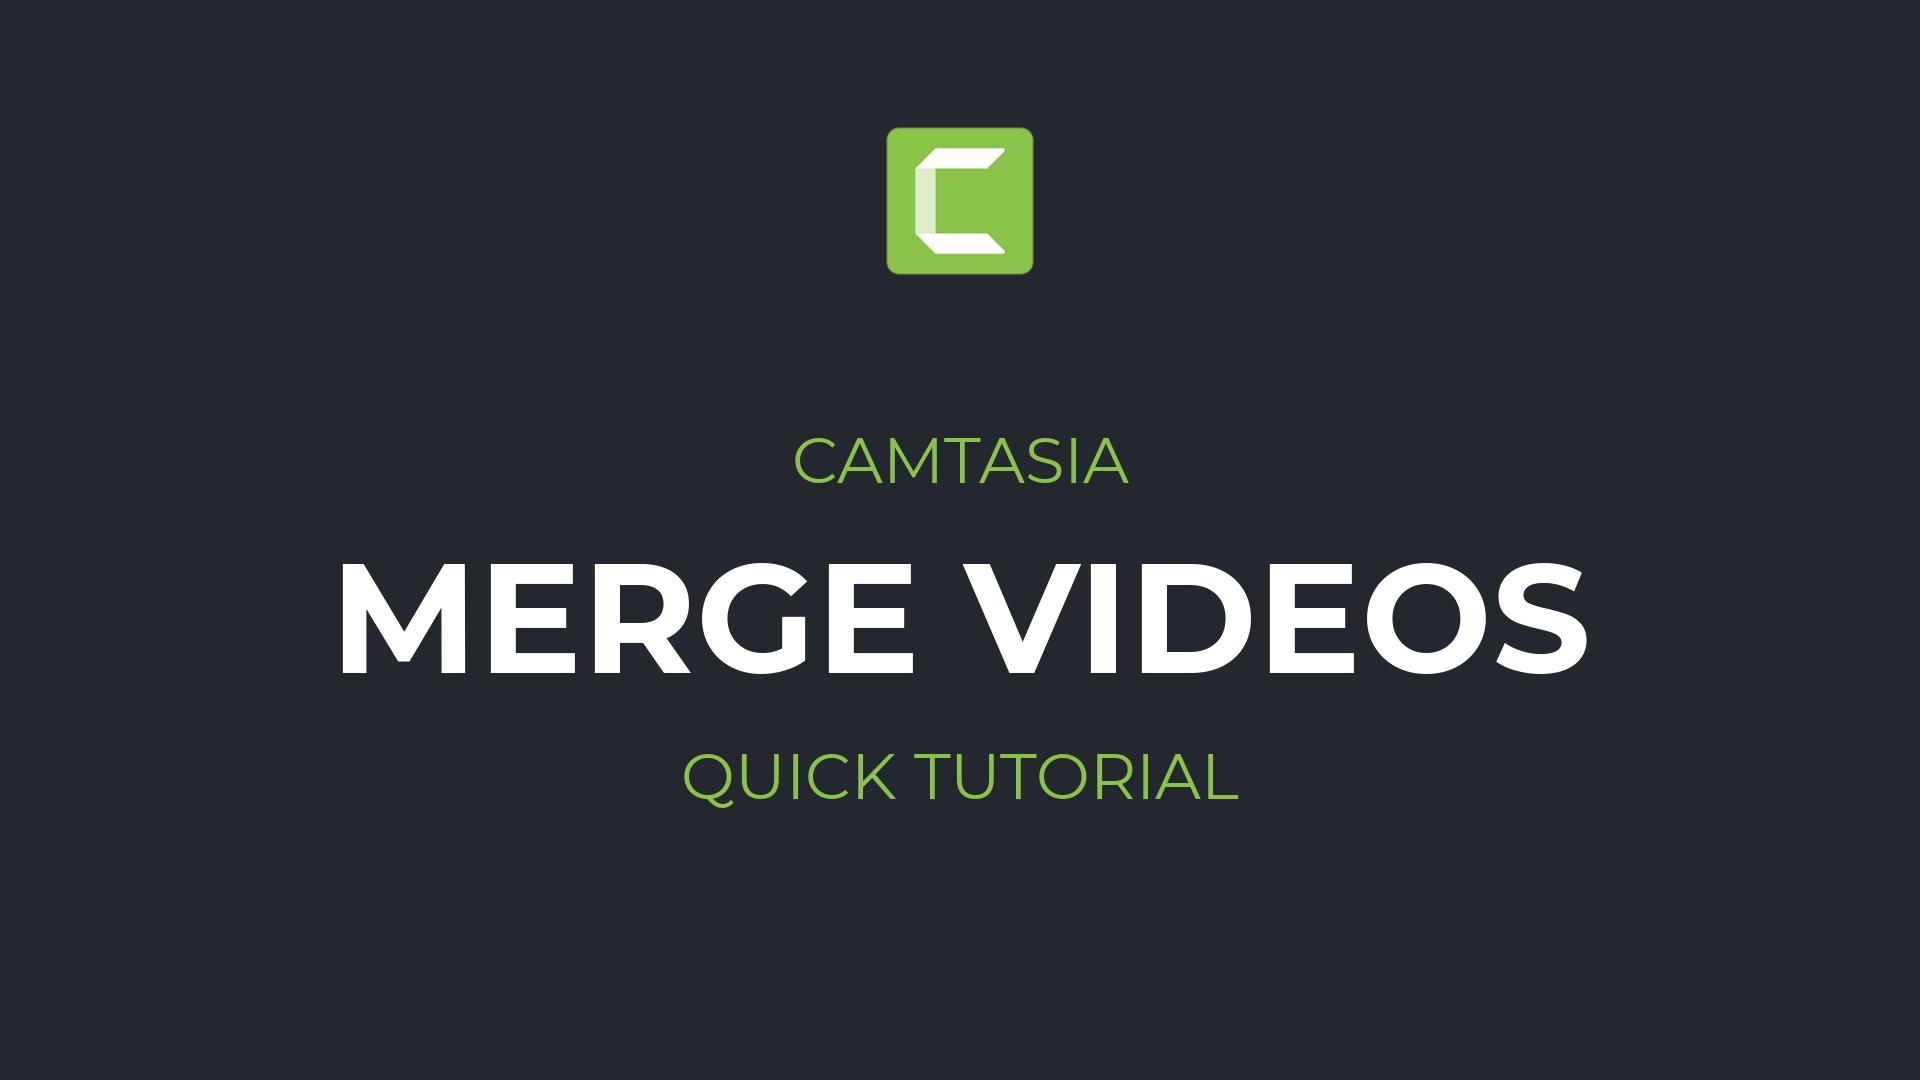 How to merge two videos in Camtasia